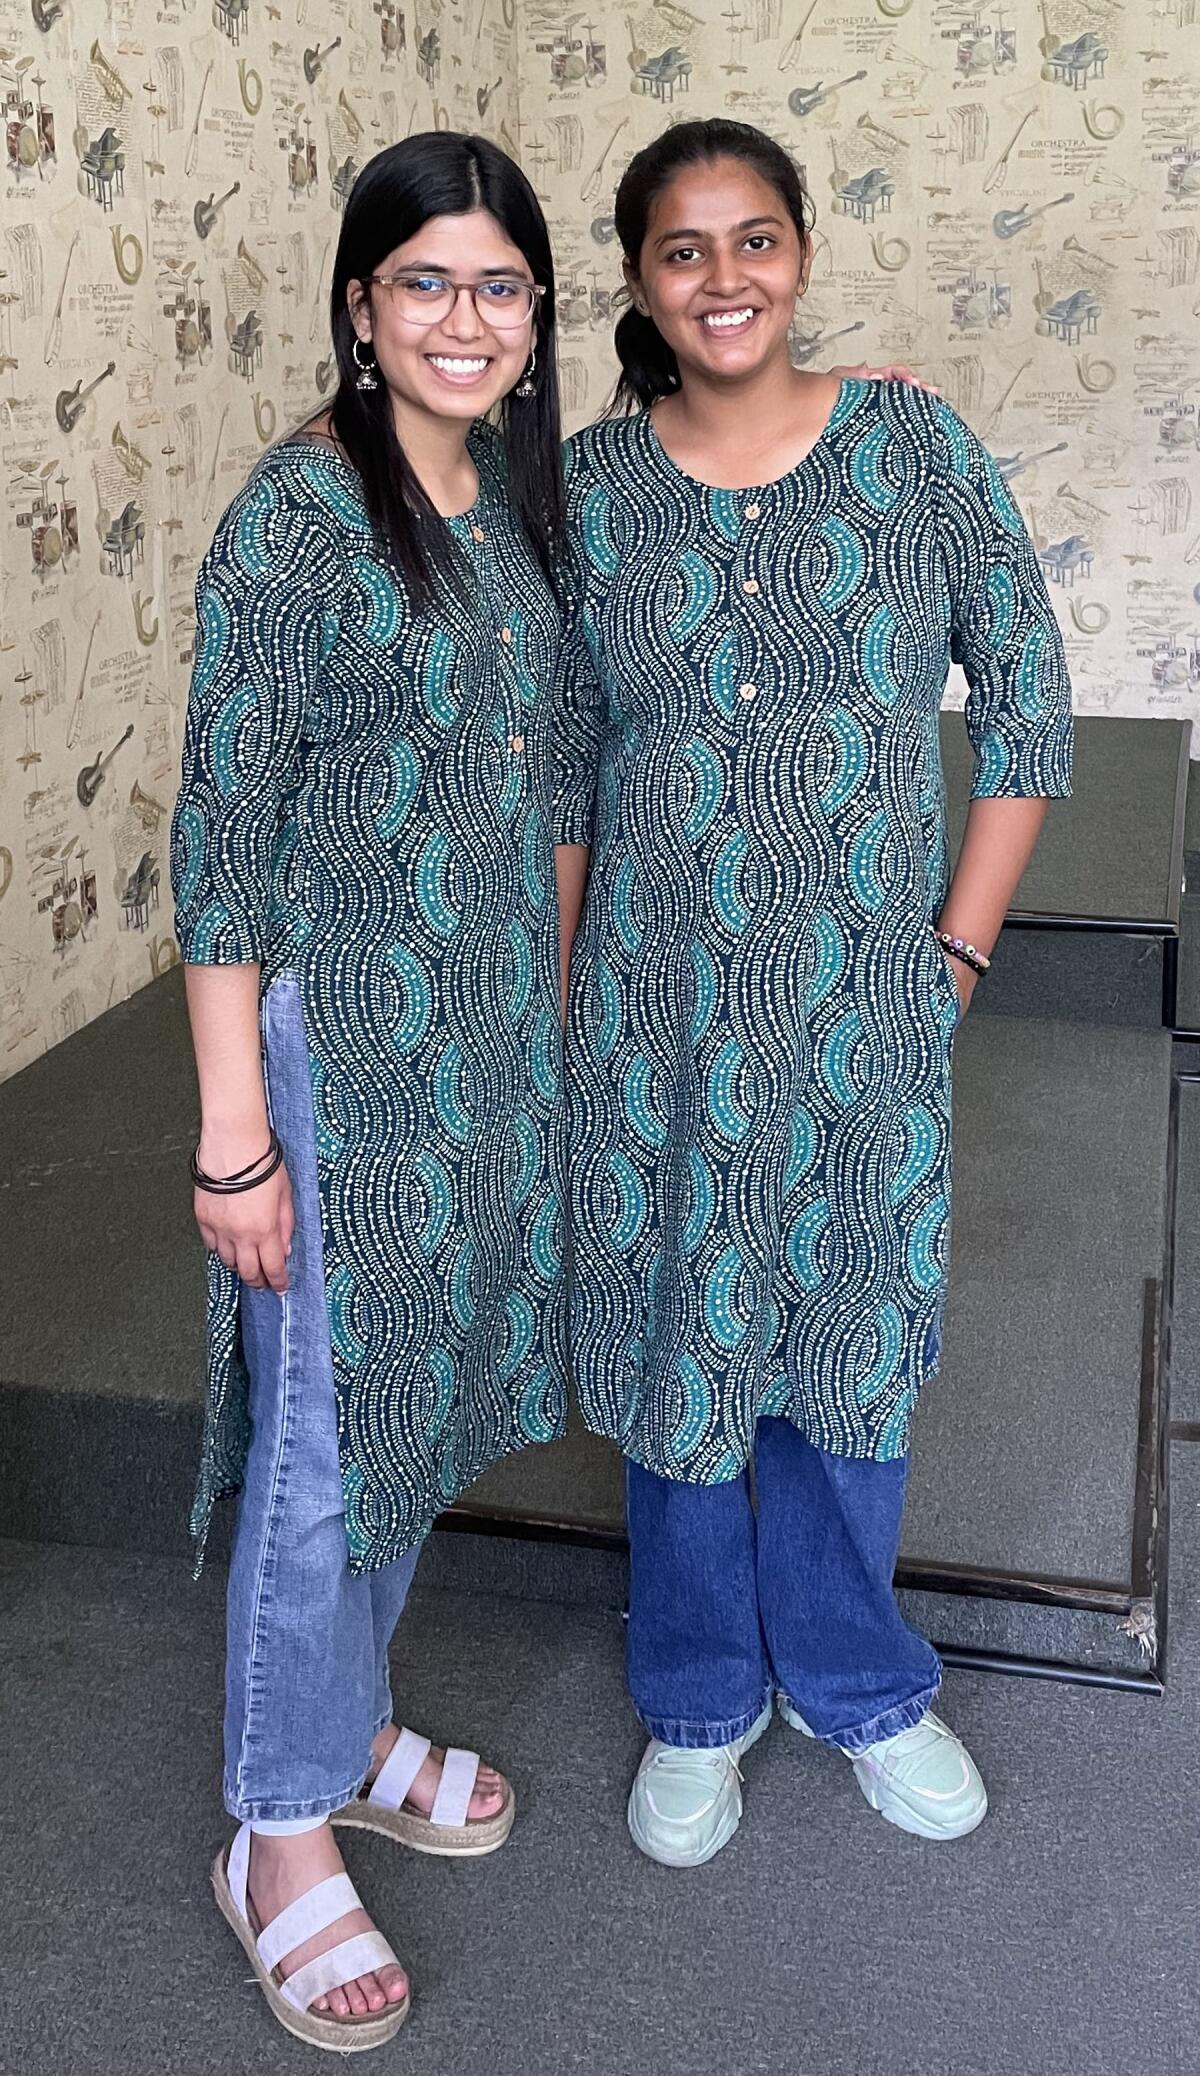 Exchange student Nirja Trivedi with host sister, Manya Saini. They bought matching dresses during a shopping trip in India.